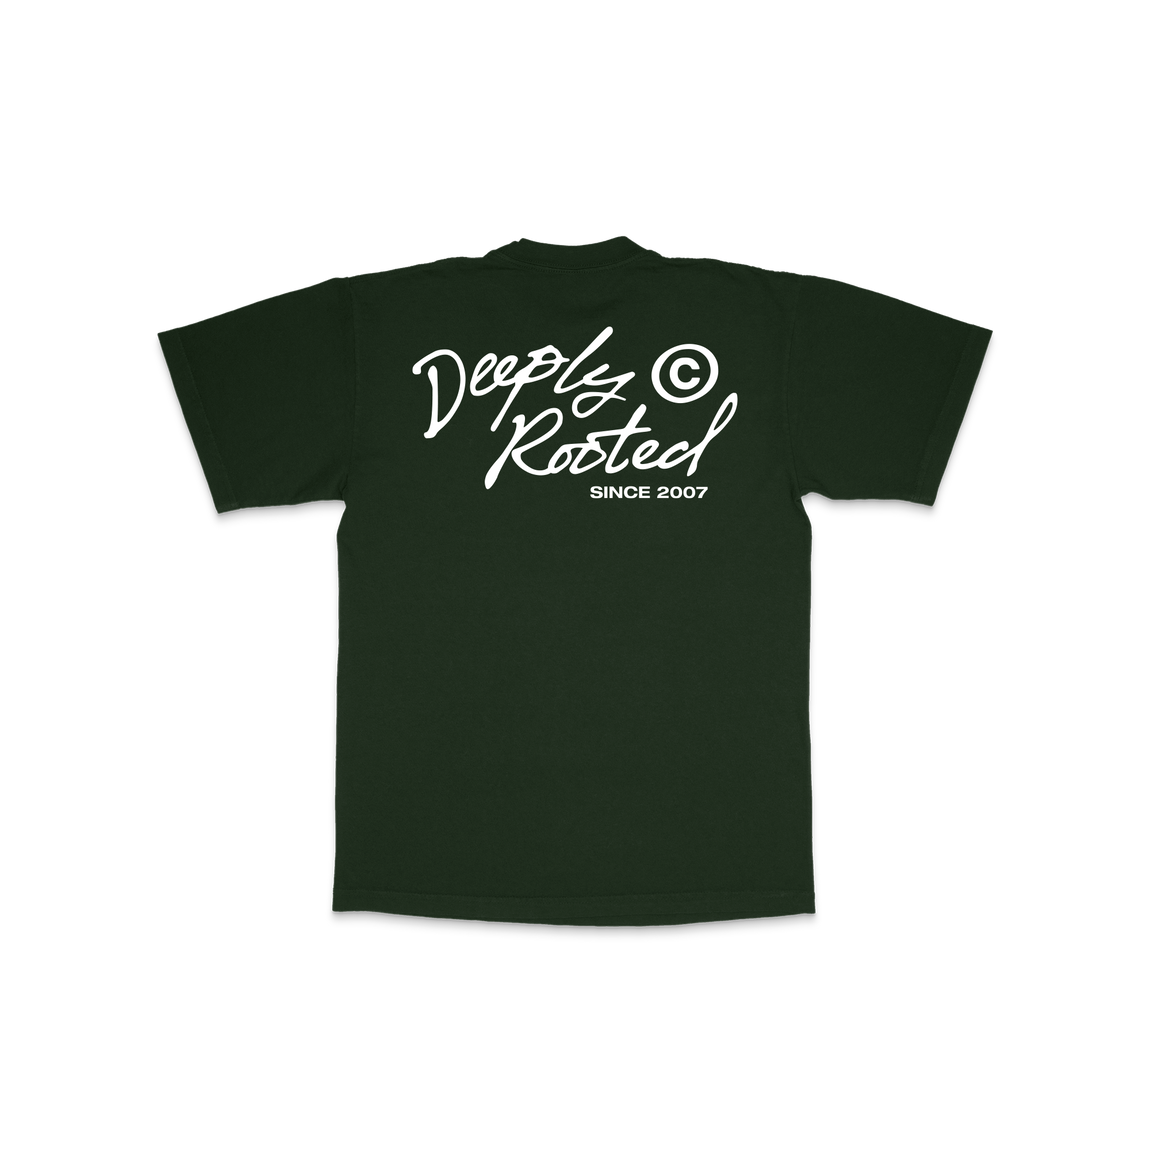 Centre Deeply Rooted Tee (Ivy) - Centre Deeply Rooted Tee (Ivy) - 